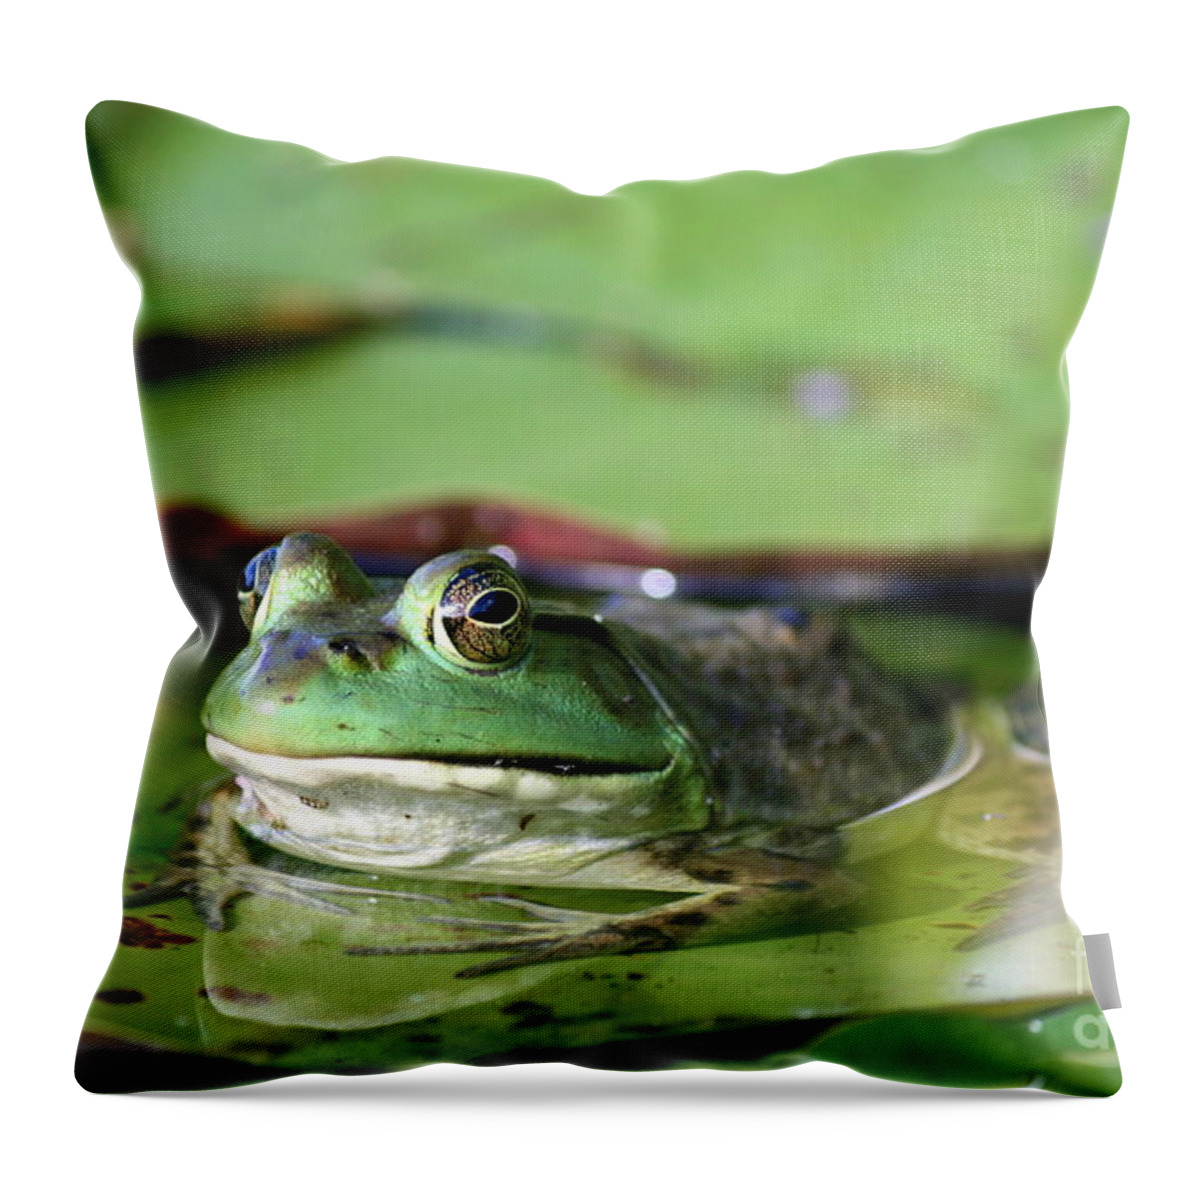 Frog Throw Pillow featuring the photograph Roseland Lake American Green Frog by Neal Eslinger